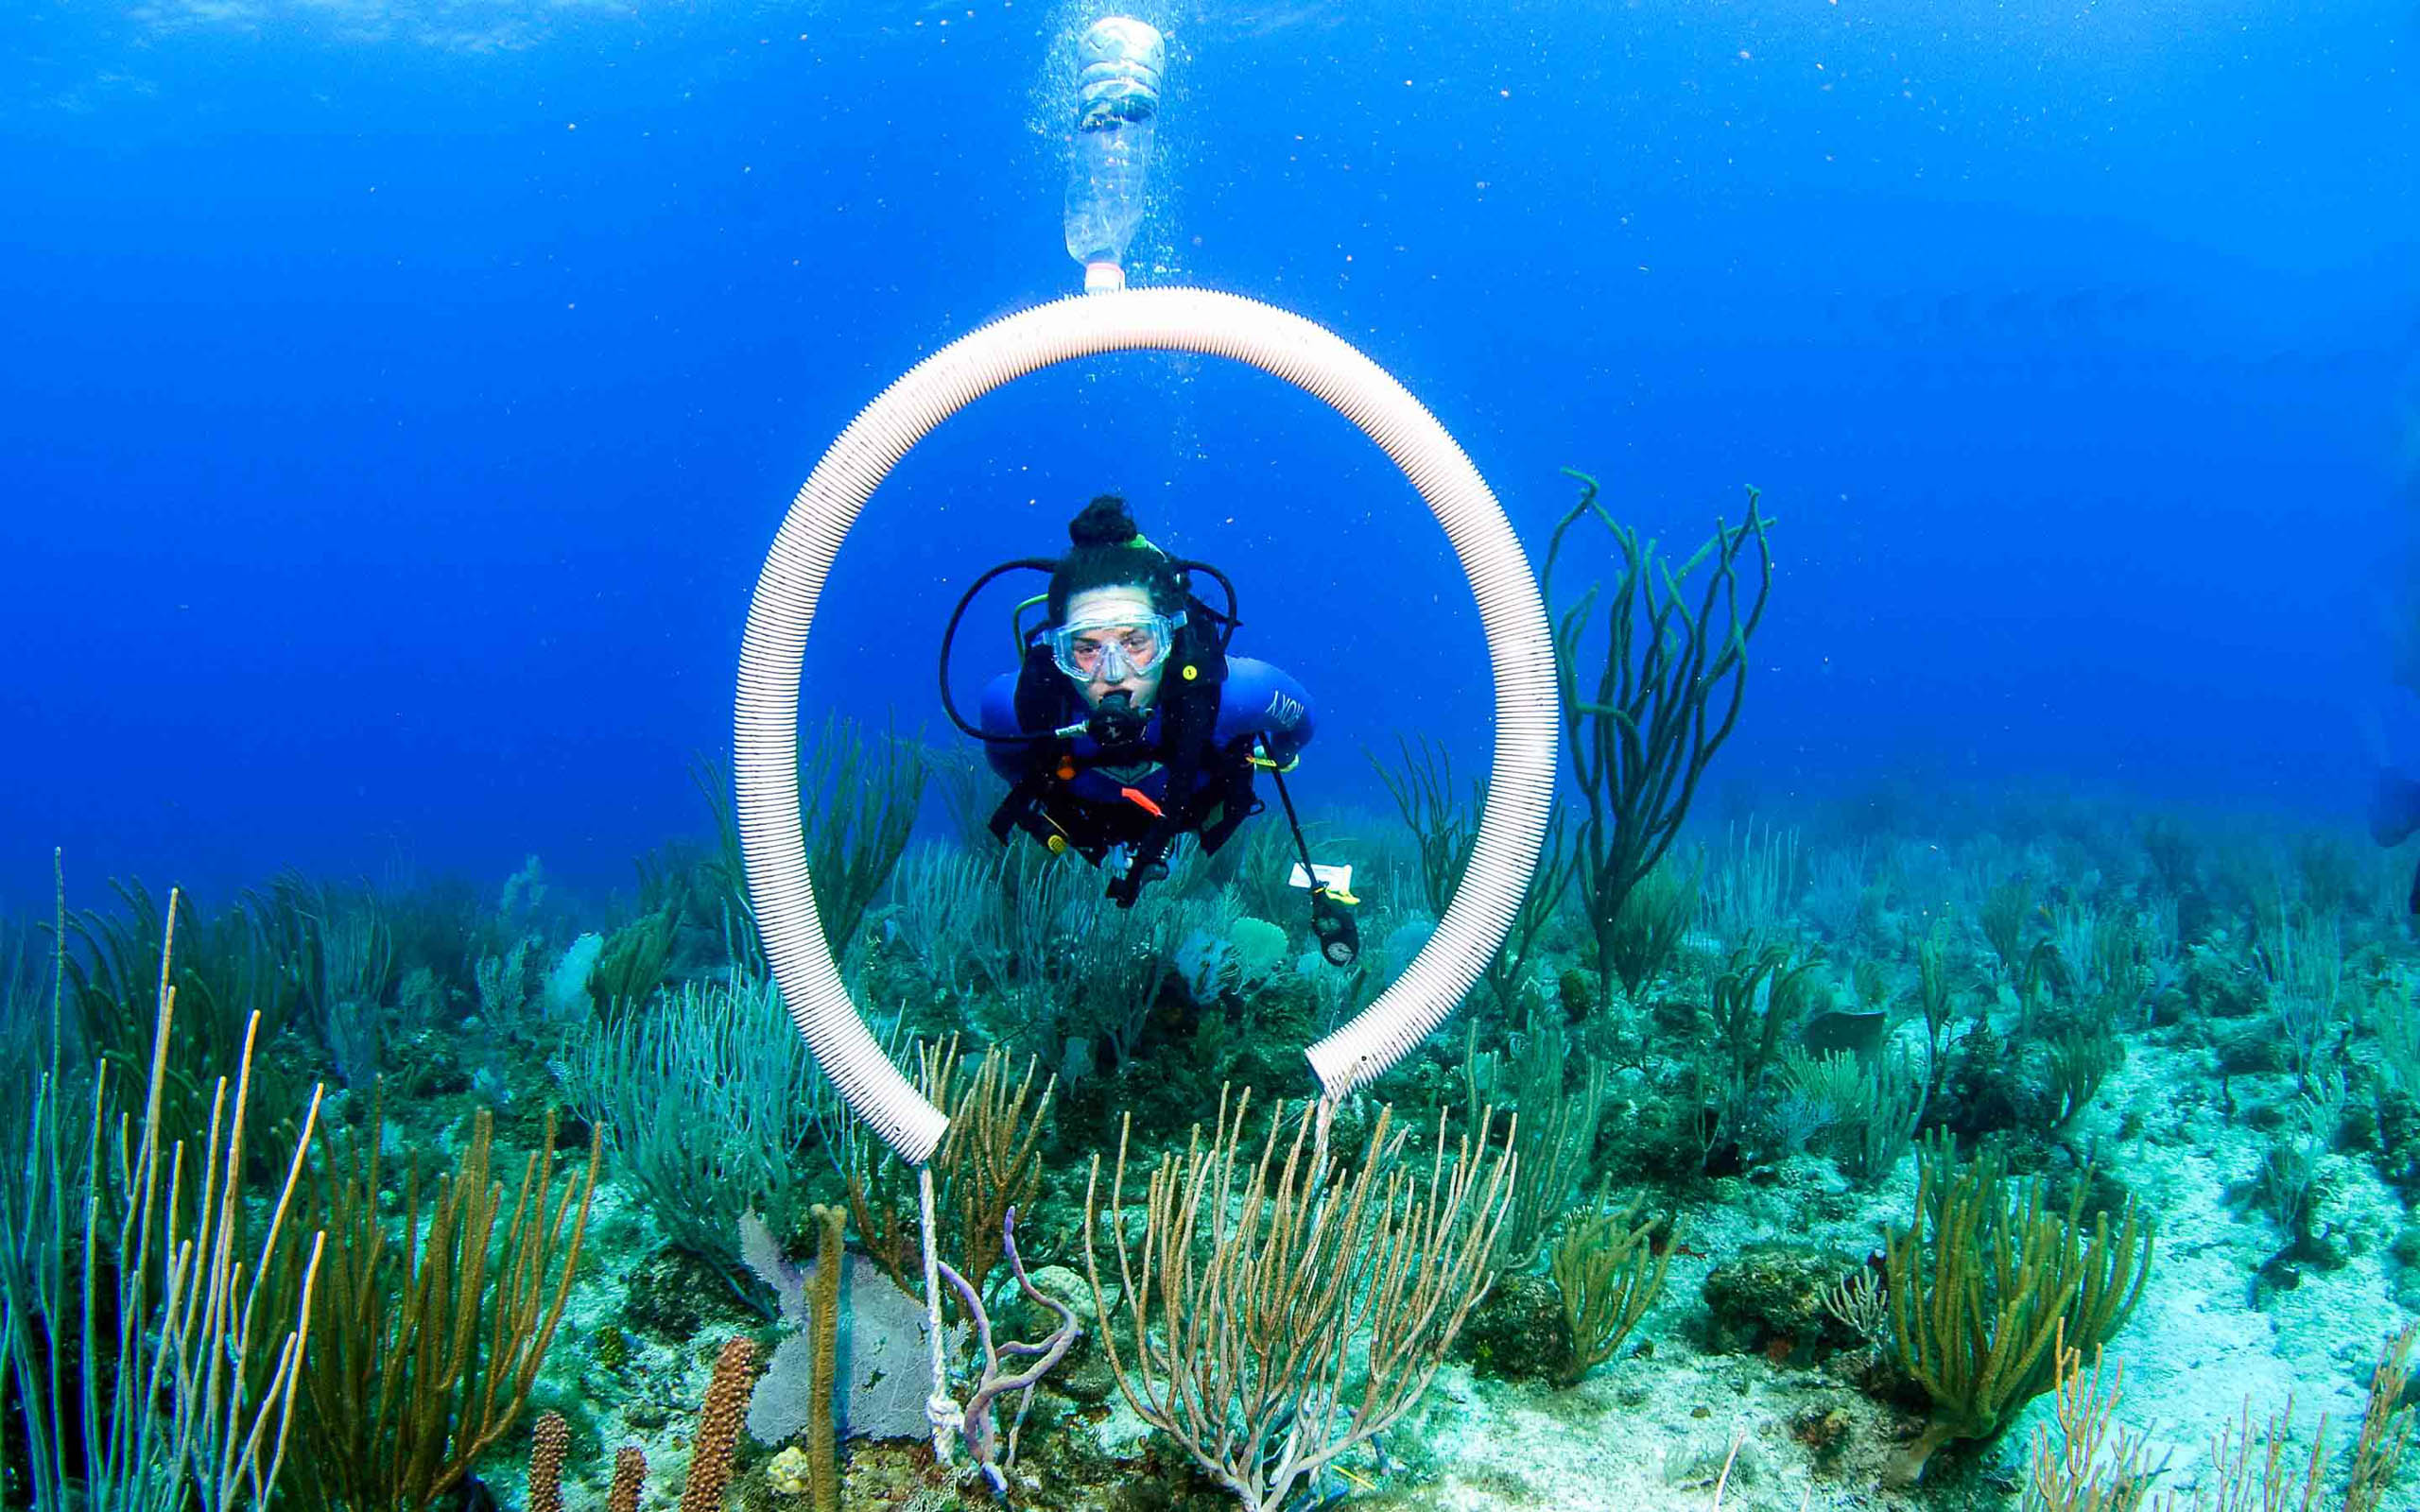 A scuba diver with a hose in the water.